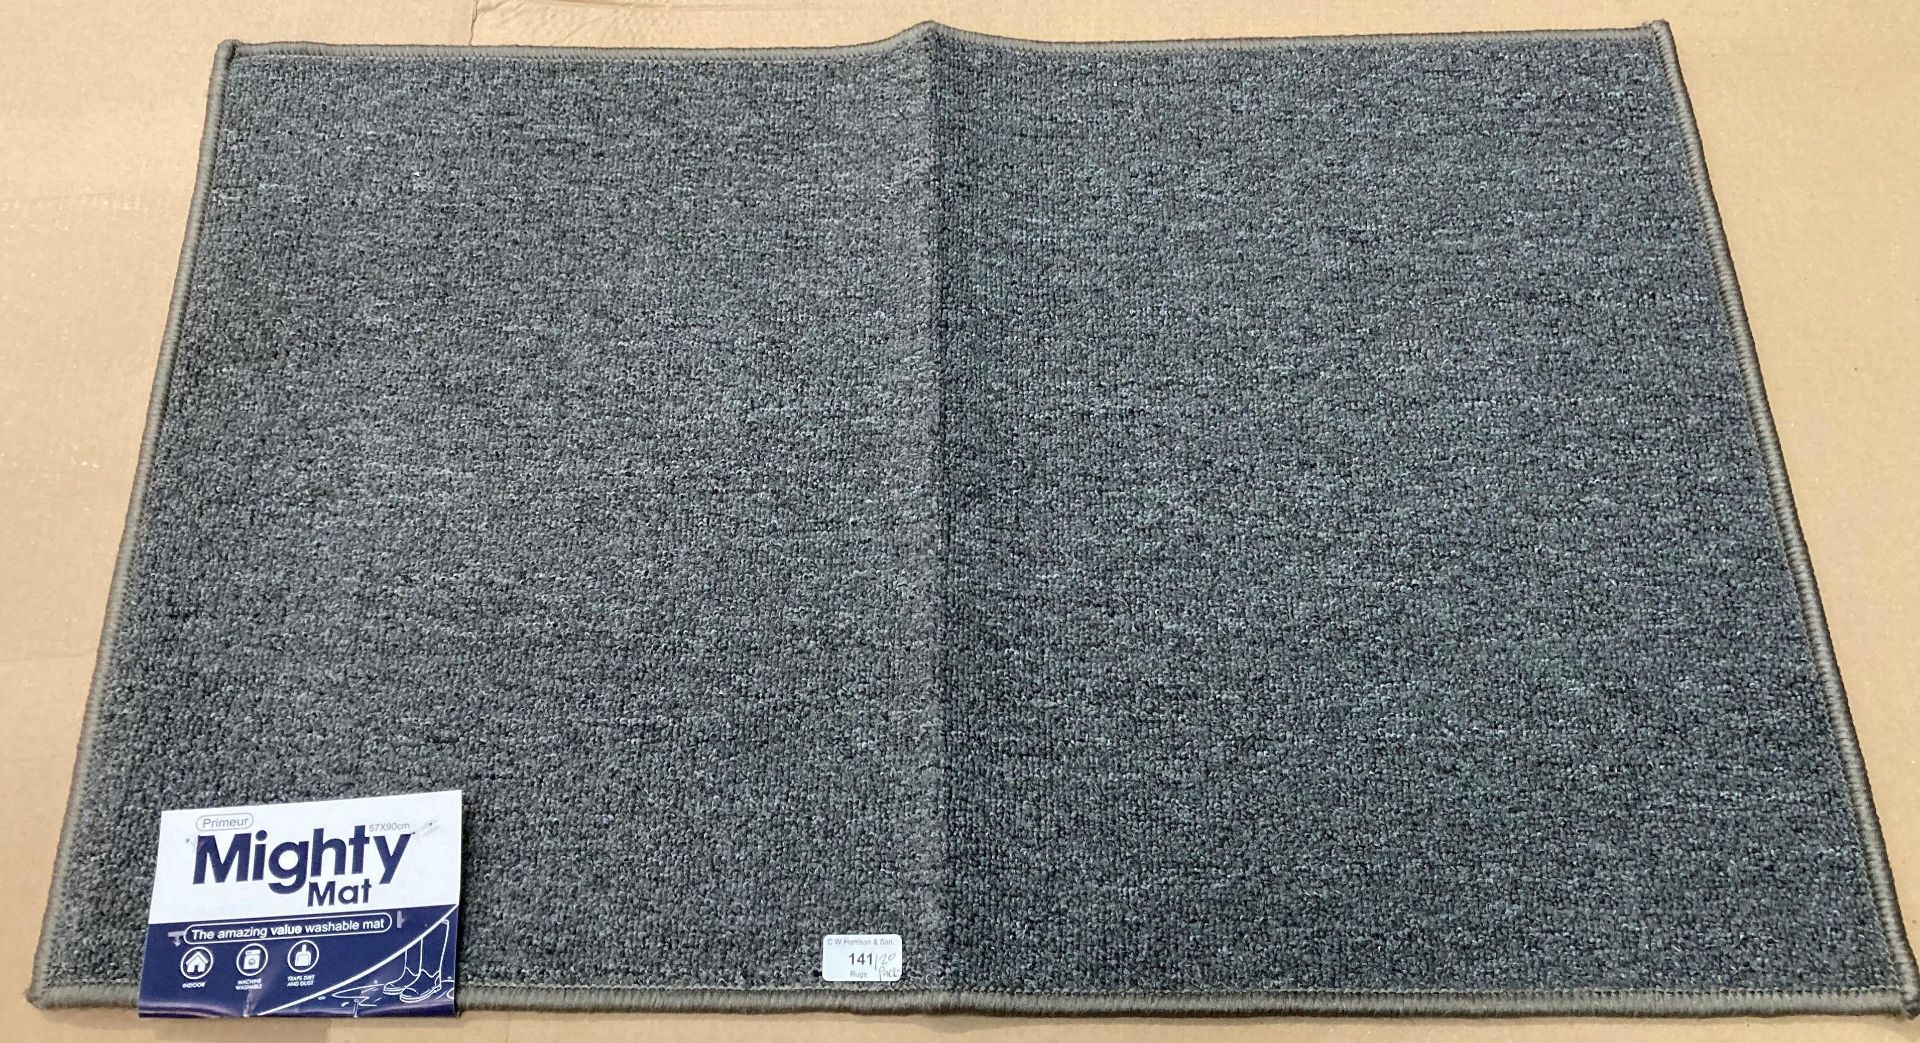 20 x Mighty Mat washable plain grey mats 57cm x 90cm (QD) *Please note the final purchase price is